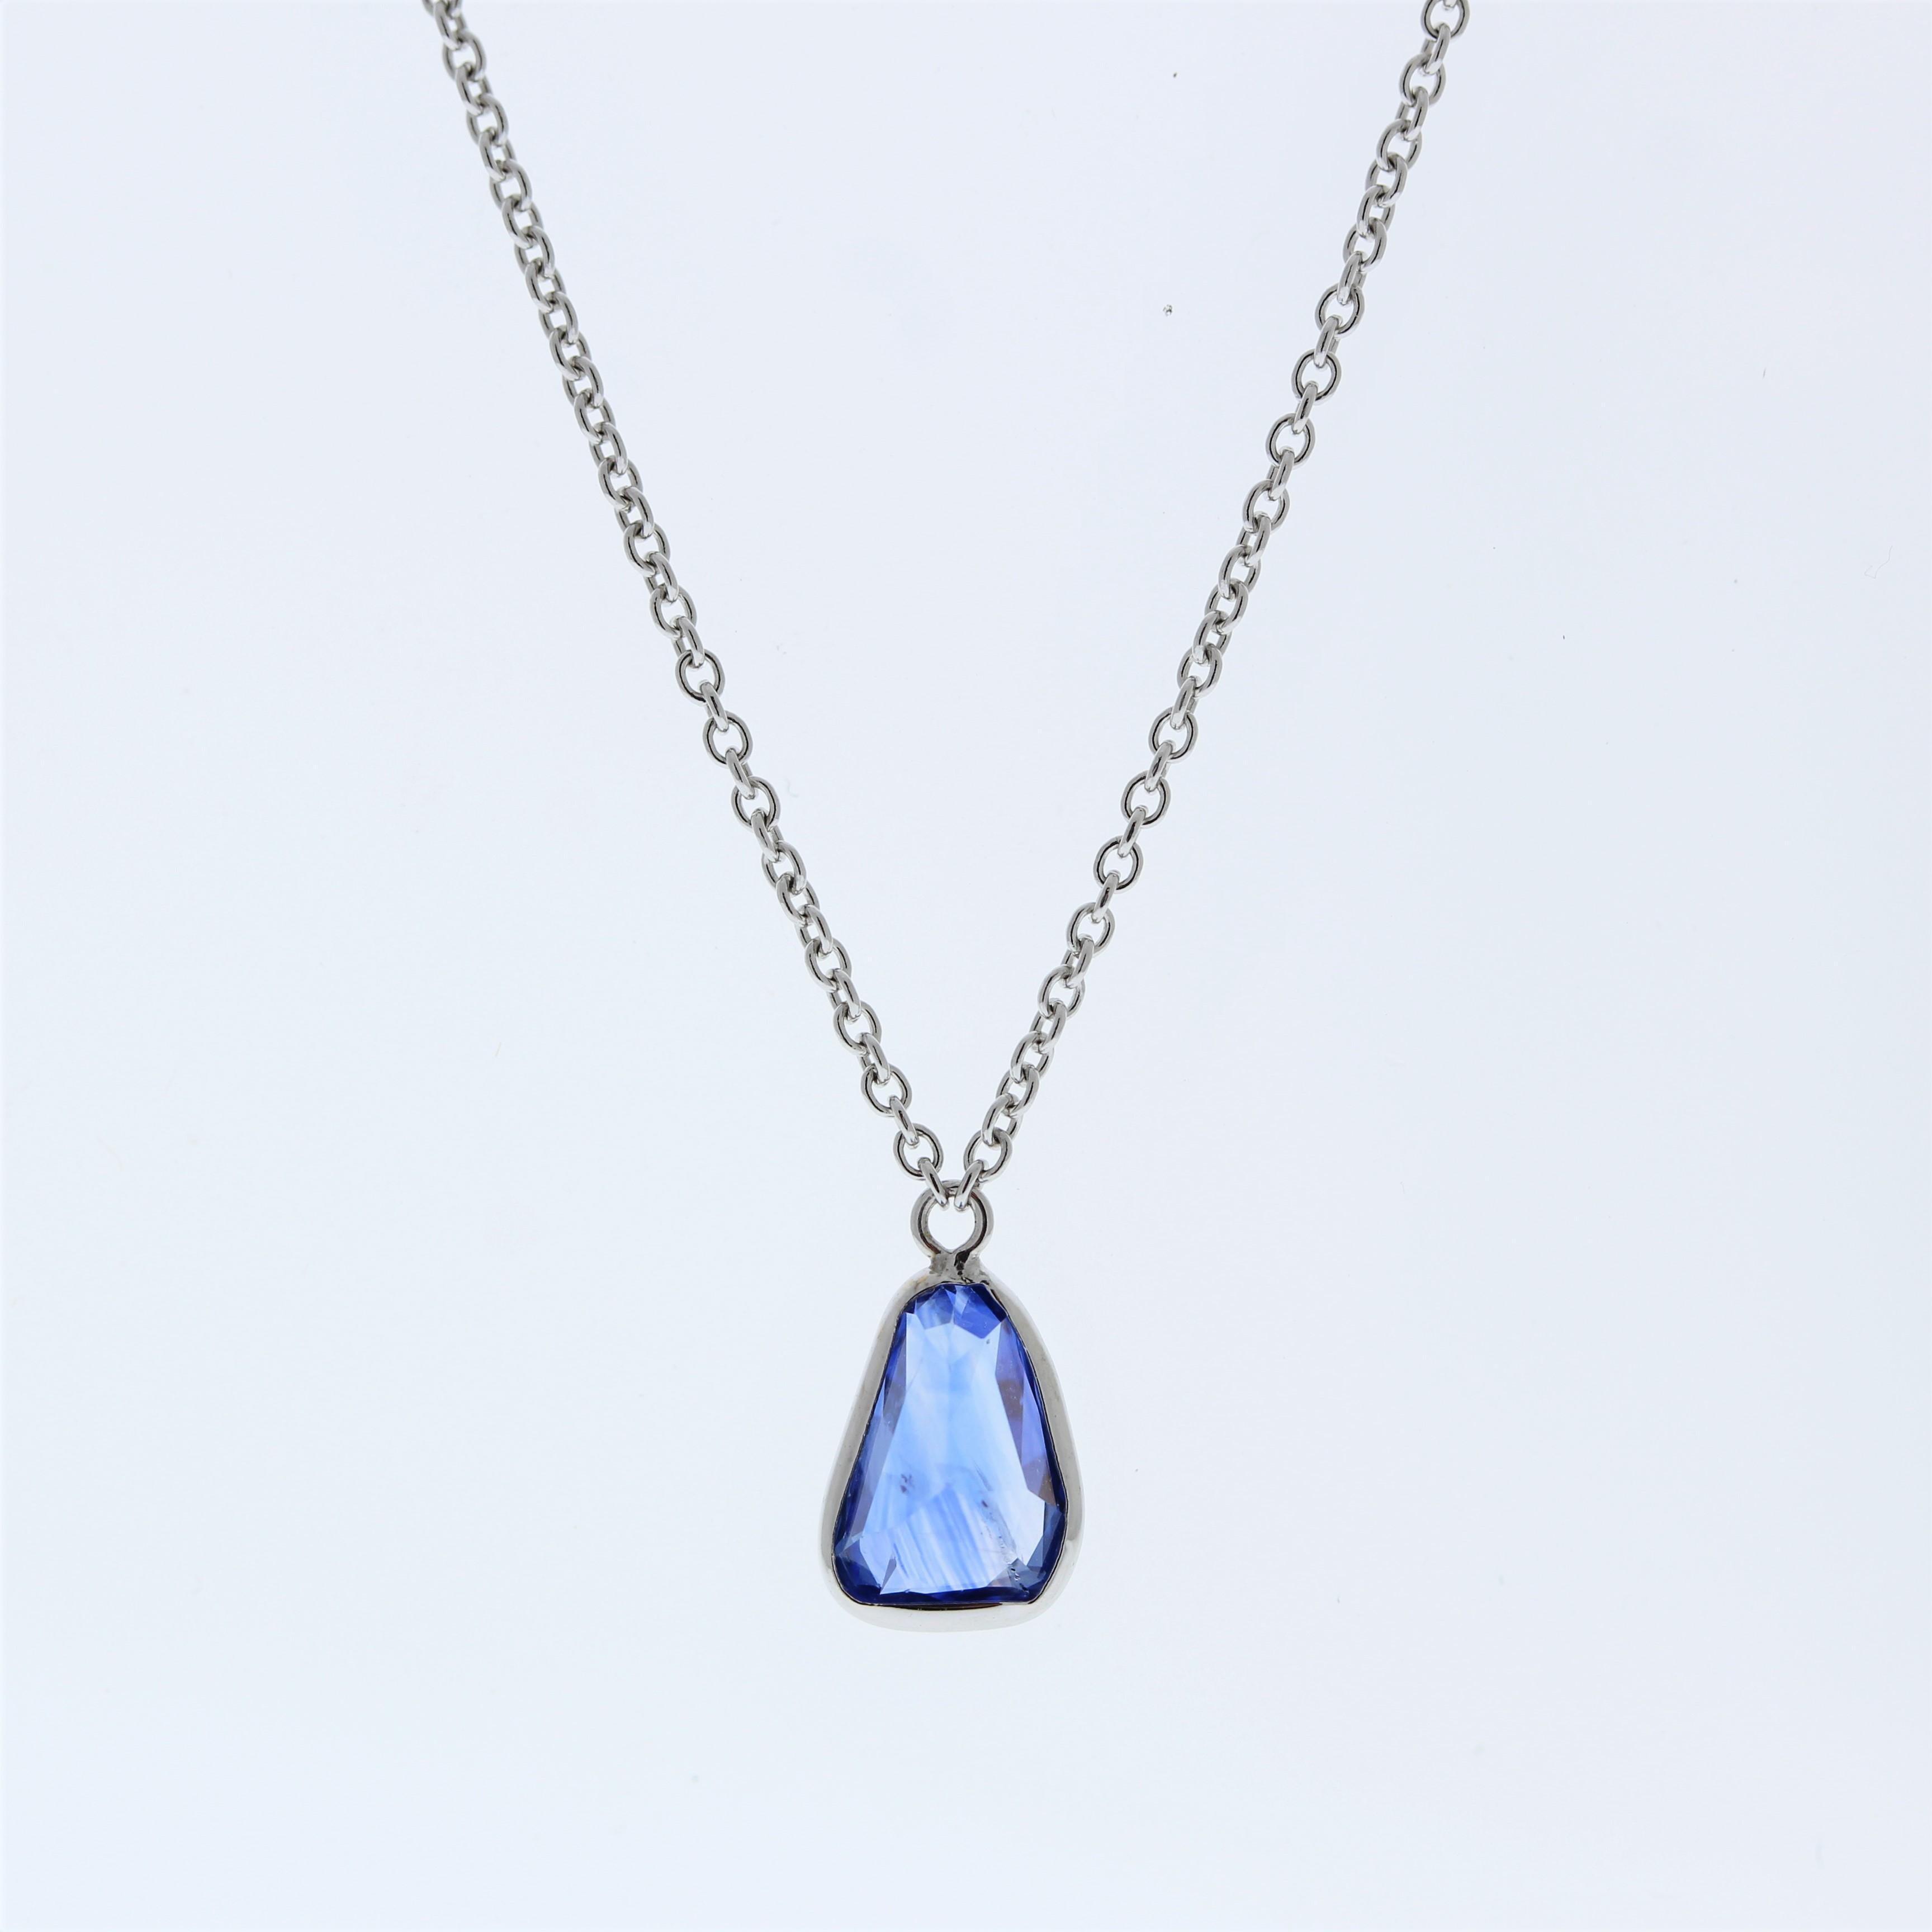 Uncut 1.76 Carat Triangle Sapphire Blue Fashion Necklaces In 14k White Gold For Sale